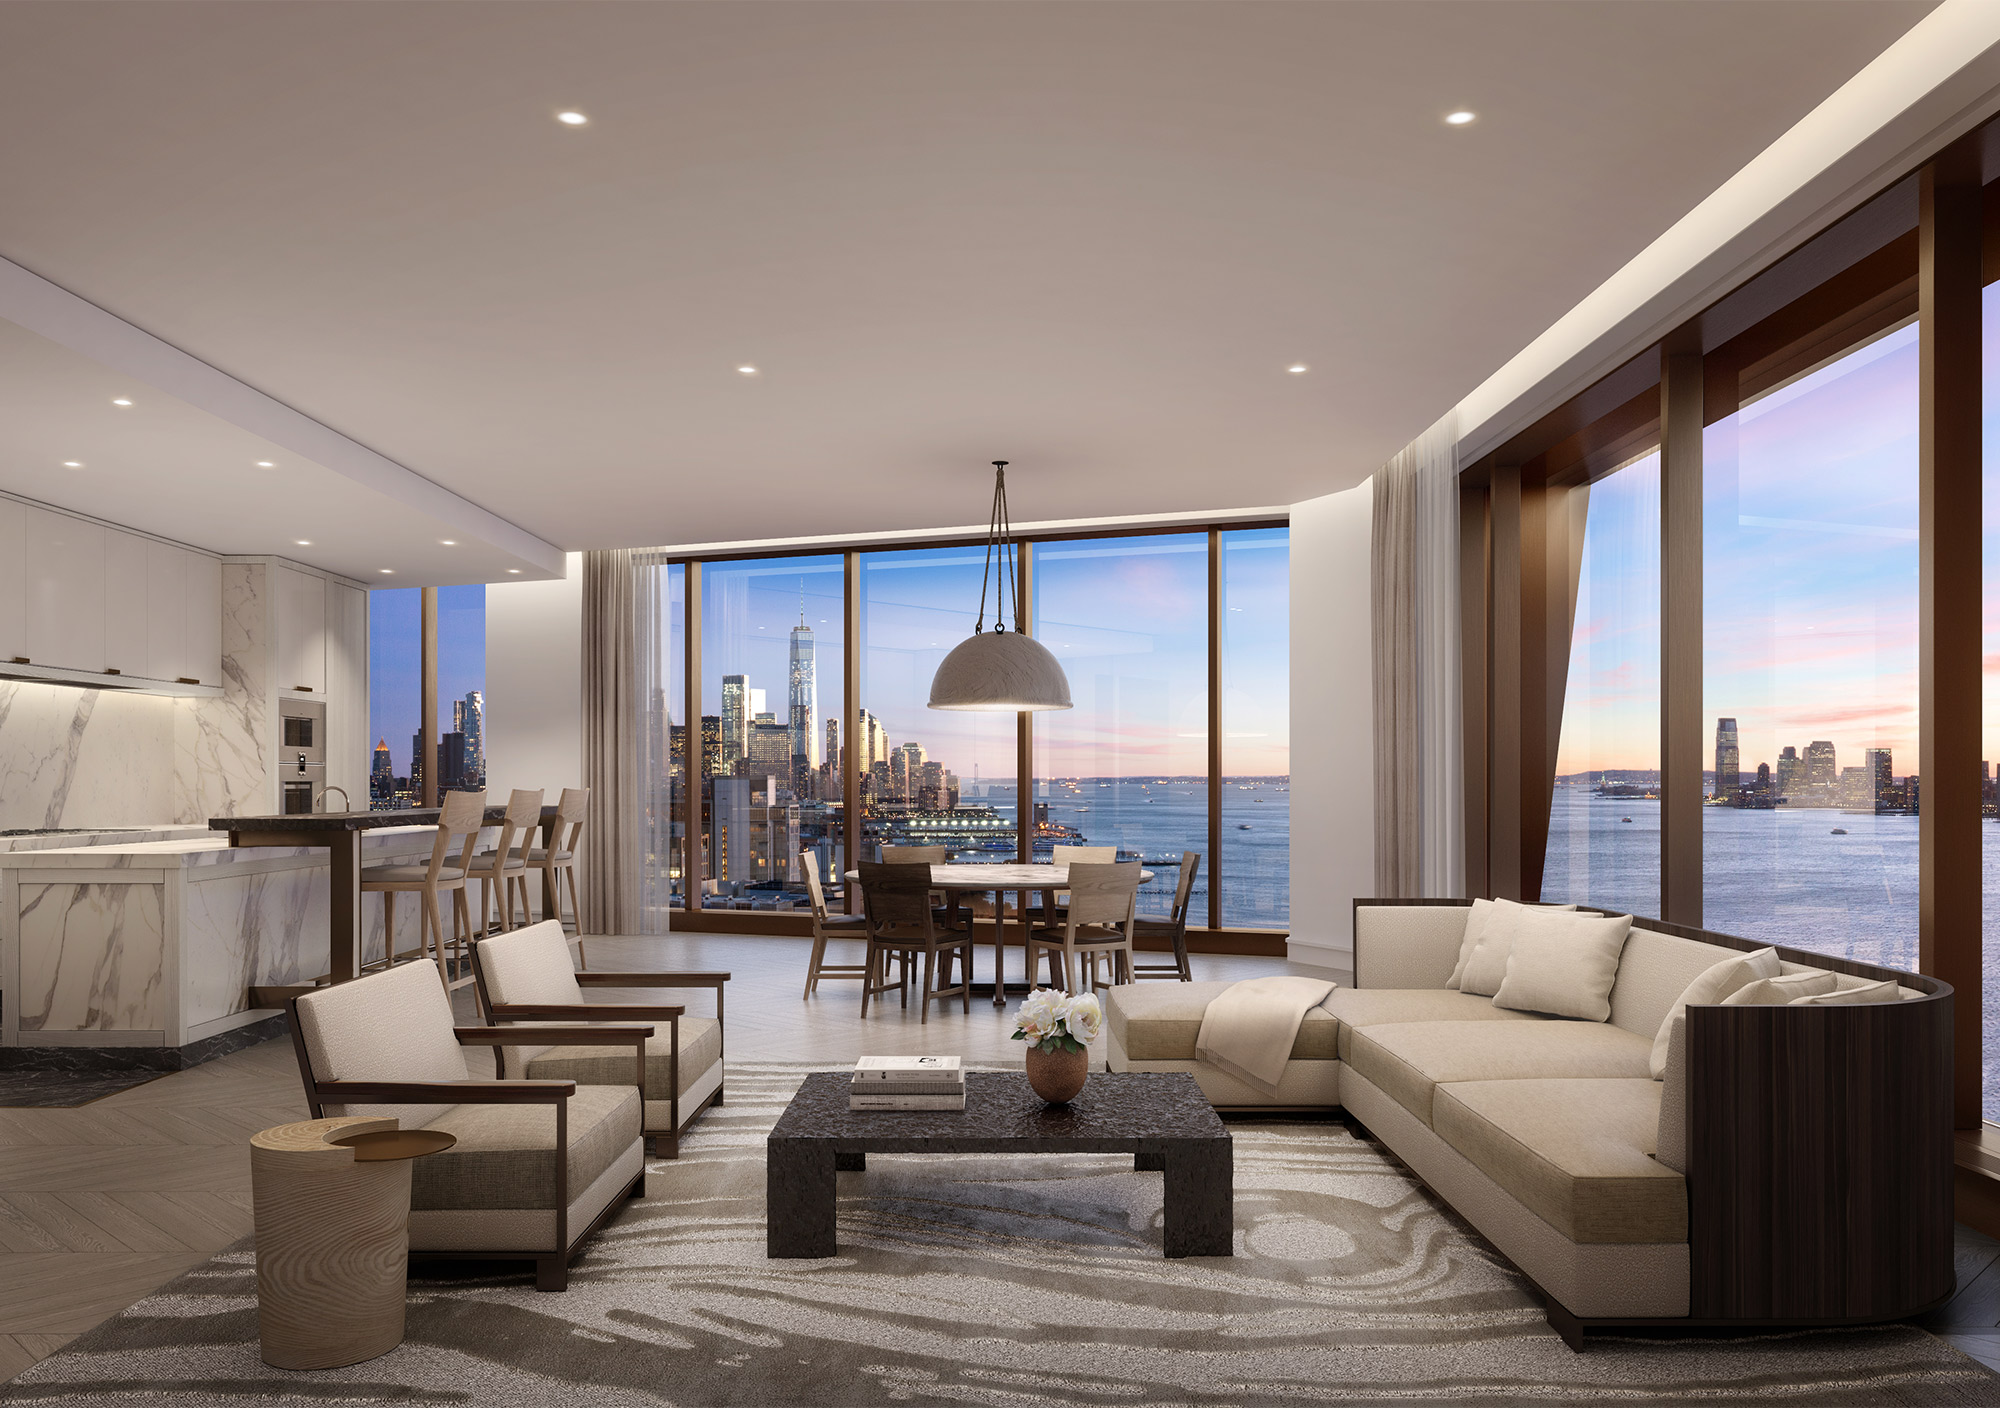 Luxurious living area, dining area and kitchen overlooking the Hudson river and city skyline